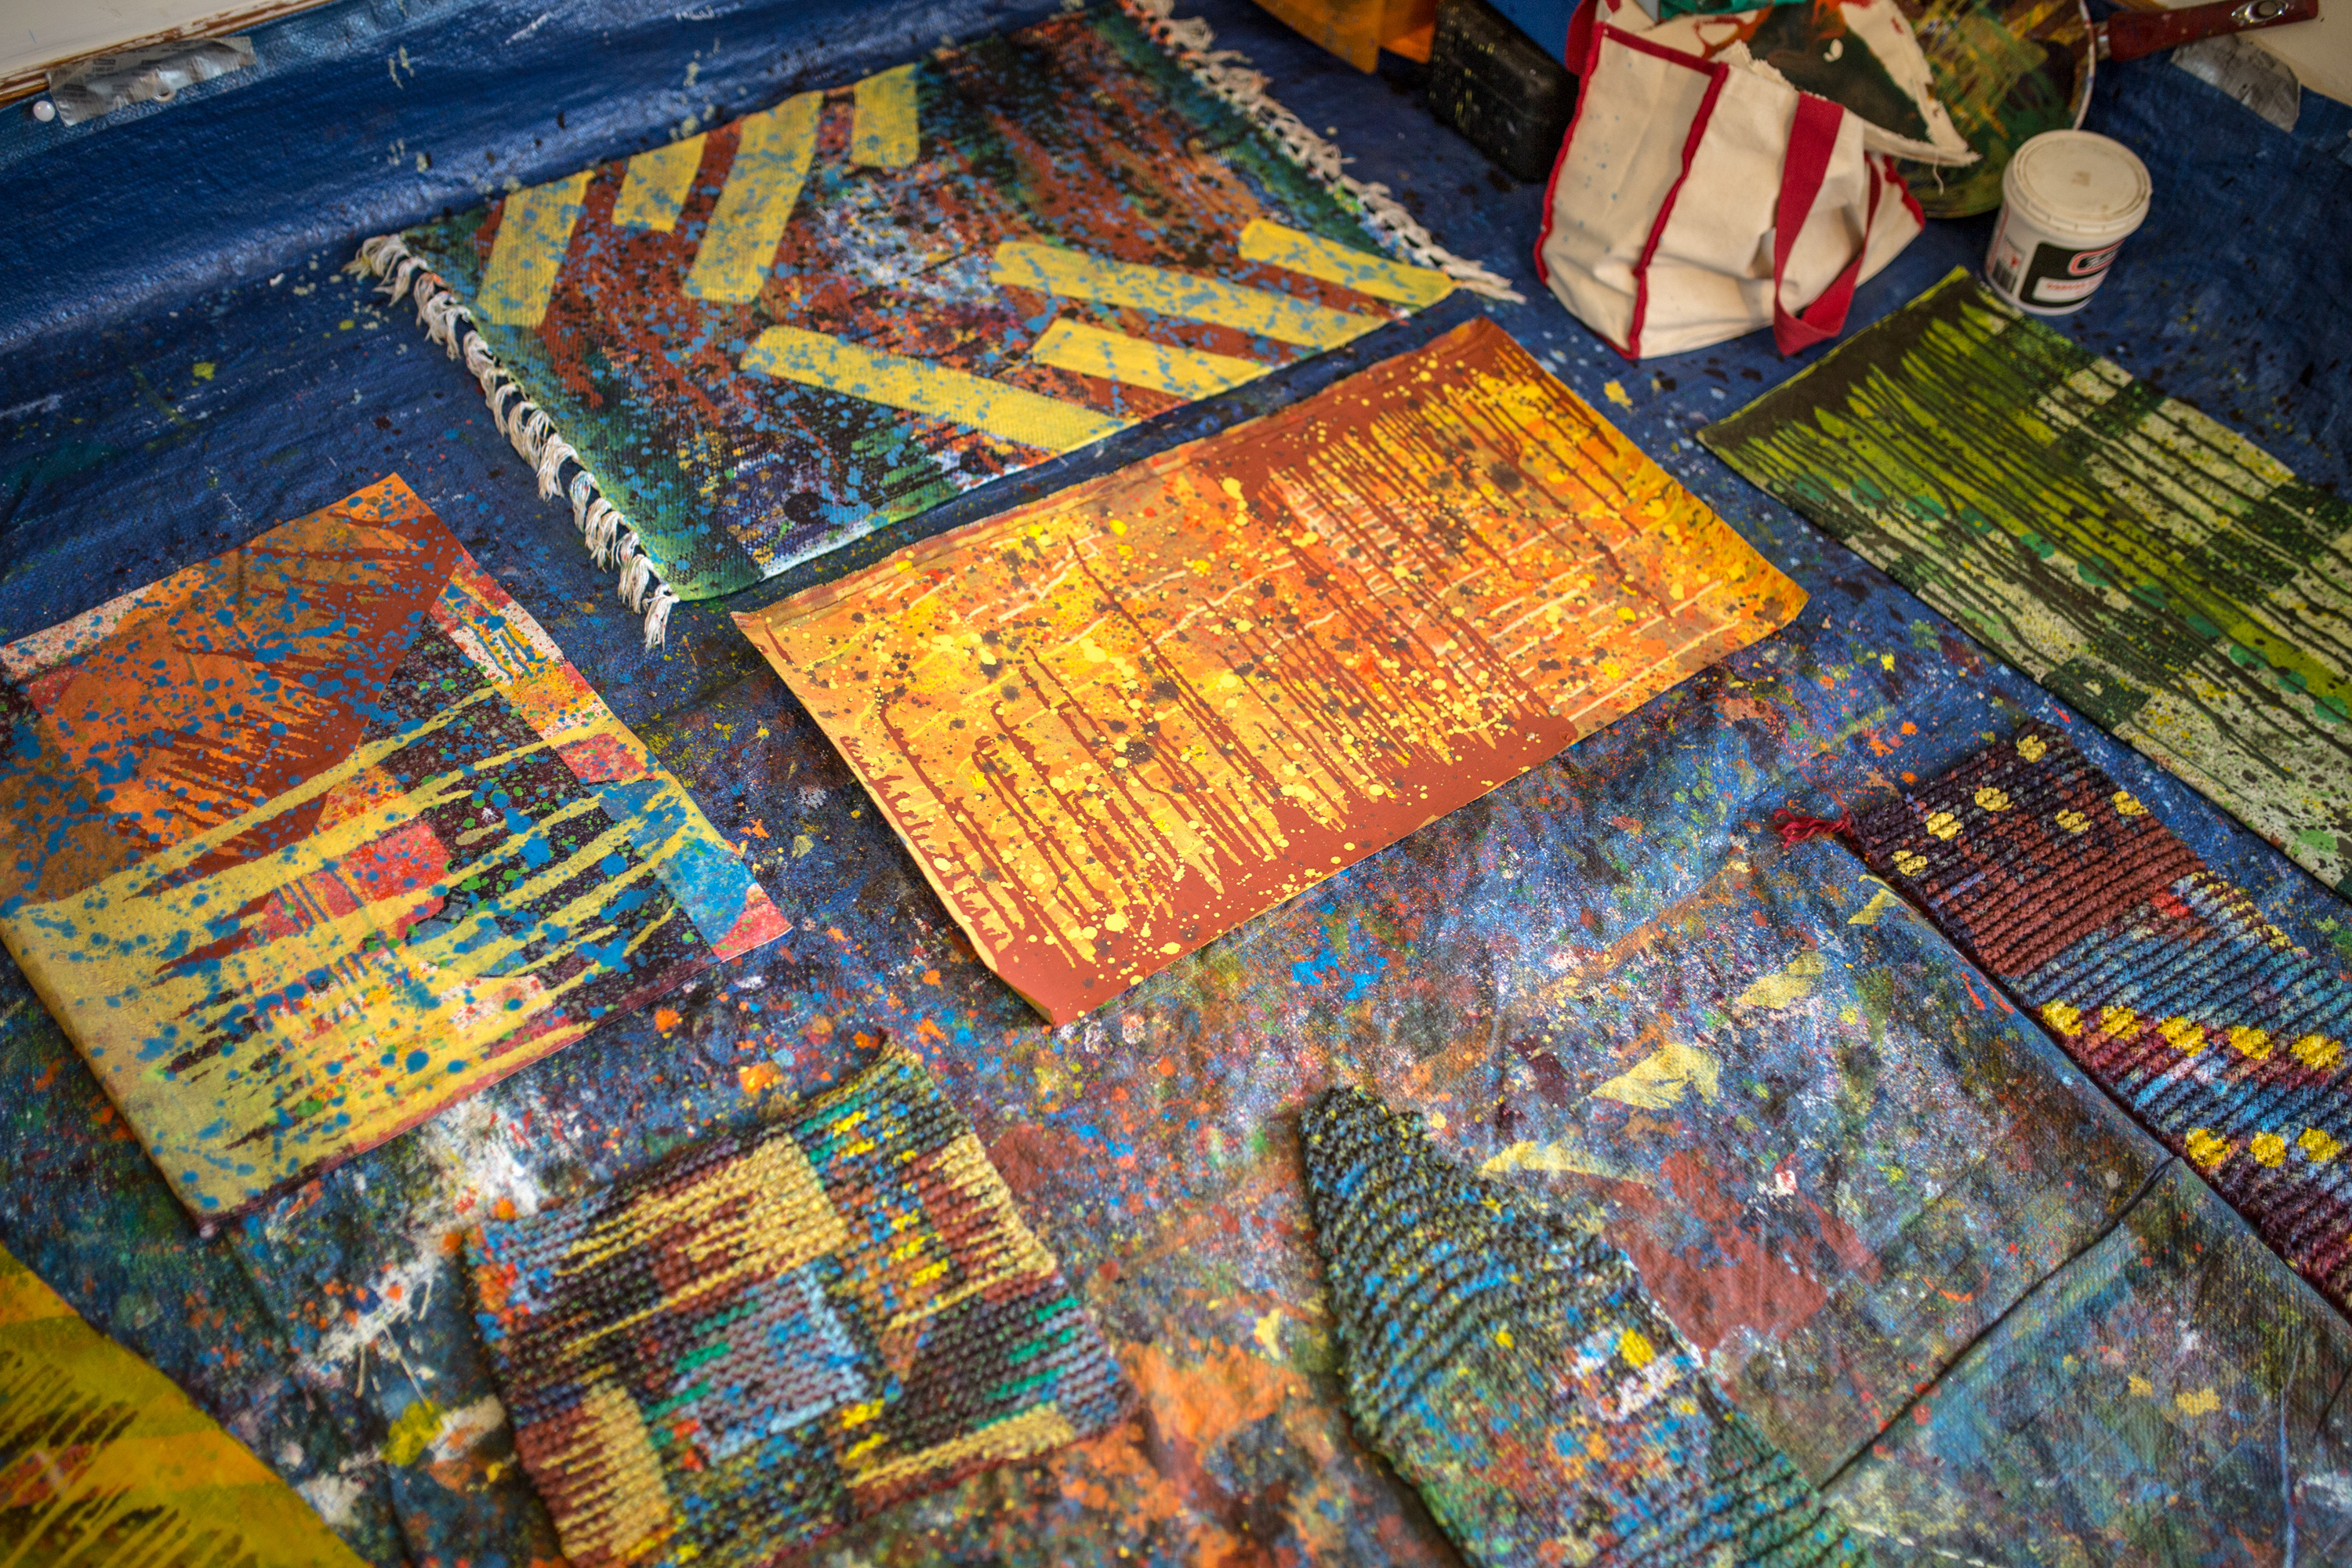 Miranda Aisling's artwork on the floor of her studio, abstract and colorful